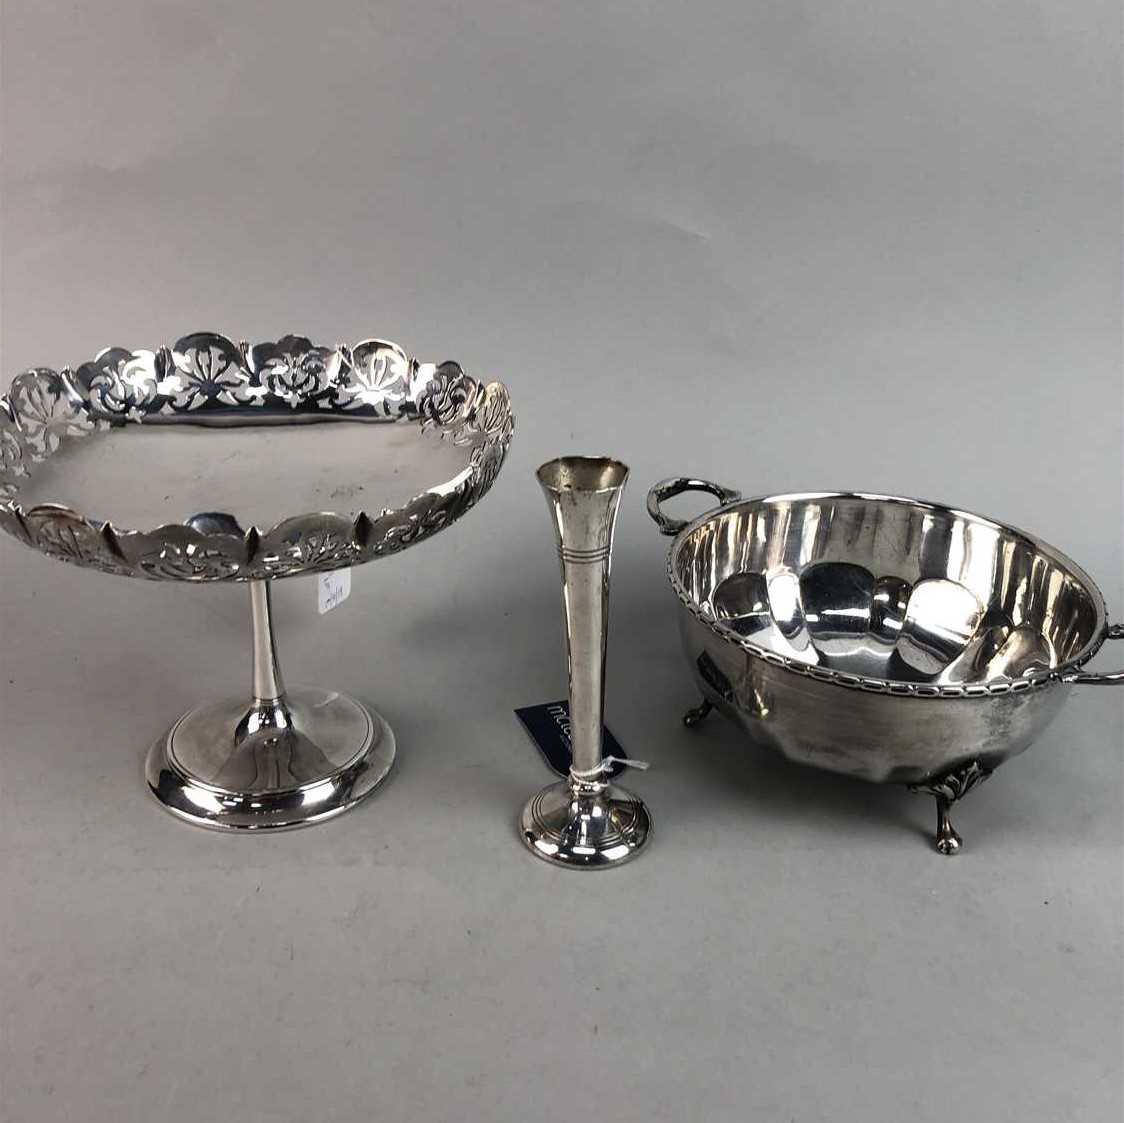 Lot 186 - A SILVER CANDLESTICK AND PLATED WARE